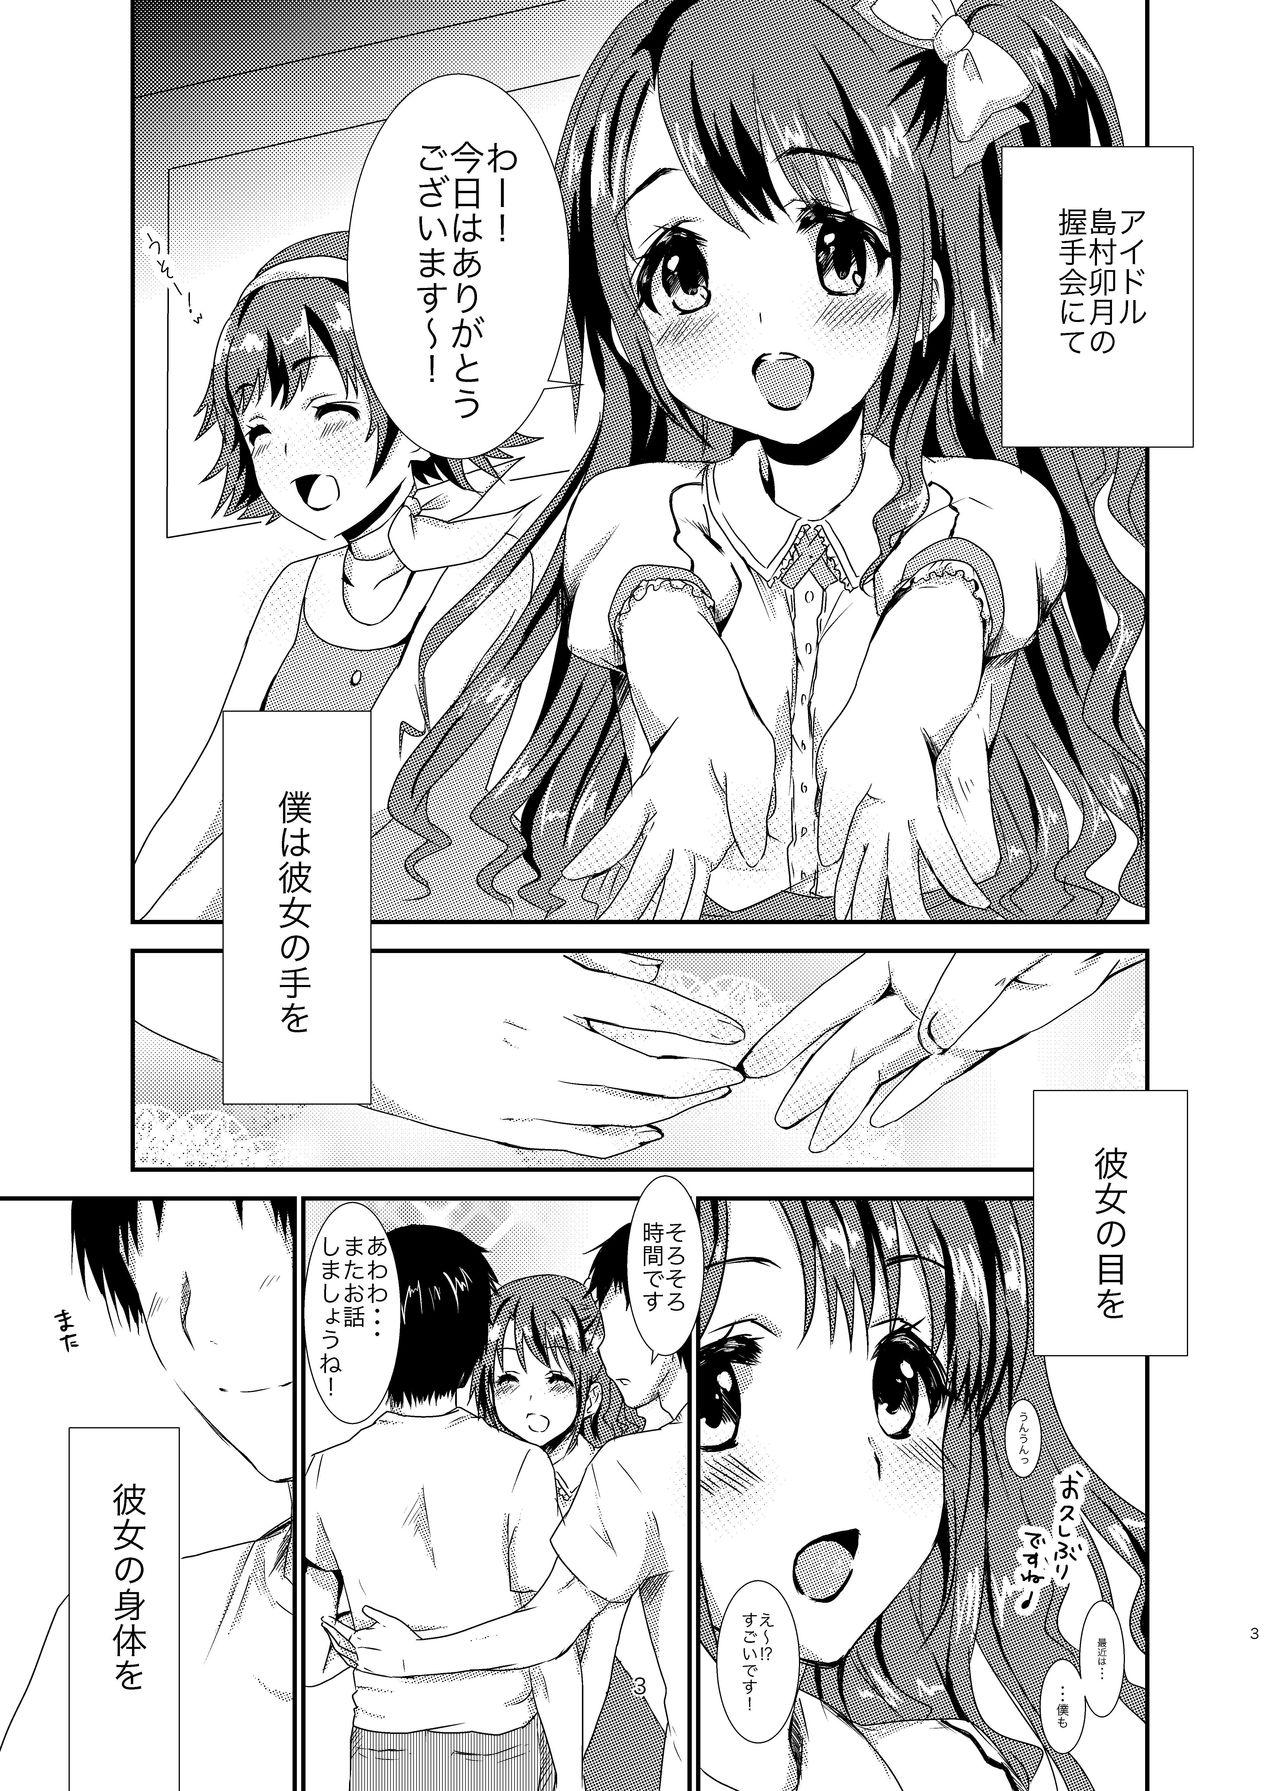 Cheating office+love2 - The idolmaster Porn - Page 2